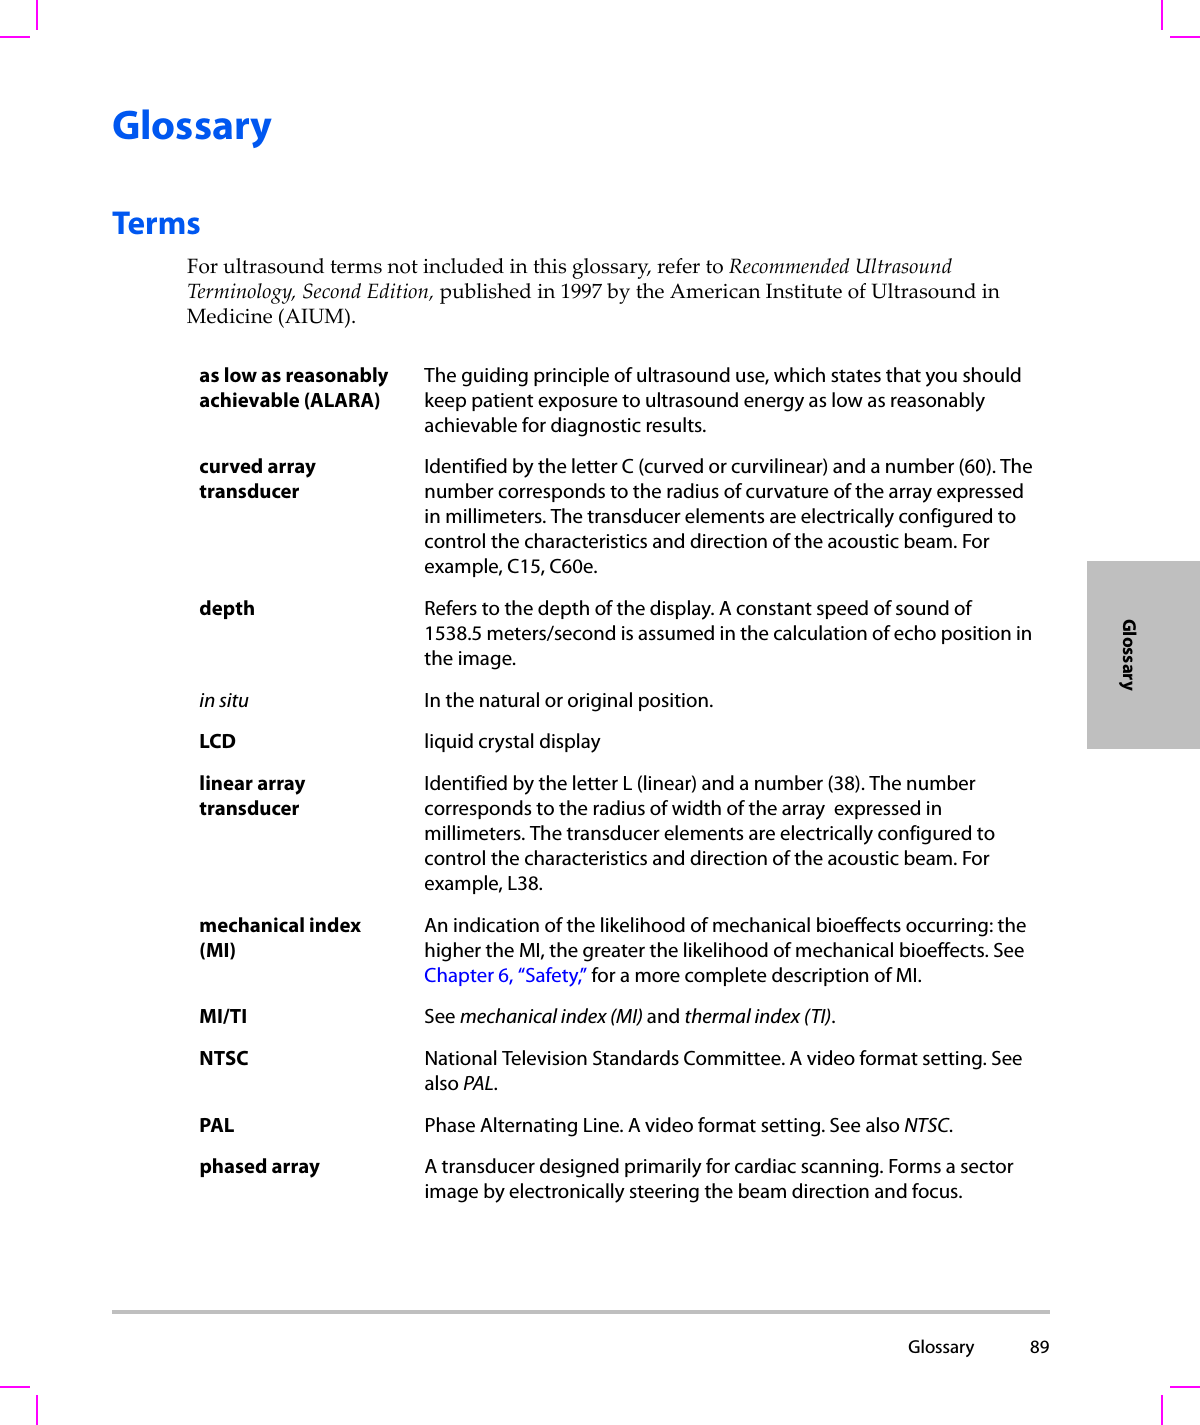  Glossary 89GlossaryGlossaryTermsForultrasoundtermsnotincludedinthisglossary,refertoRecommendedUltrasoundTerminology,SecondEdition,publishedin1997bytheAmericanInstituteofUltrasoundinMedicine(AIUM).as low as reasonably achievable (ALARA)The guiding principle of ultrasound use, which states that you should keep patient exposure to ultrasound energy as low as reasonably achievable for diagnostic results.curved array transducerIdentified by the letter C (curved or curvilinear) and a number (60). The number corresponds to the radius of curvature of the array expressed in millimeters. The transducer elements are electrically configured to control the characteristics and direction of the acoustic beam. For example, C15, C60e.depth Refers to the depth of the display. A constant speed of sound of 1538.5 meters/second is assumed in the calculation of echo position in the image.in situ In the natural or original position.LCD liquid crystal displaylinear array transducerIdentified by the letter L (linear) and a number (38). The number corresponds to the radius of width of the array  expressed in millimeters. The transducer elements are electrically configured to control the characteristics and direction of the acoustic beam. For example, L38.mechanical index (MI)An indication of the likelihood of mechanical bioeffects occurring: the higher the MI, the greater the likelihood of mechanical bioeffects. See Chapter 6, “Safety,” for a more complete description of MI.MI/TI See mechanical index (MI) and thermal index (TI).NTSC National Television Standards Committee. A video format setting. See also PAL.PAL Phase Alternating Line. A video format setting. See also NTSC.phased array A transducer designed primarily for cardiac scanning. Forms a sector image by electronically steering the beam direction and focus.